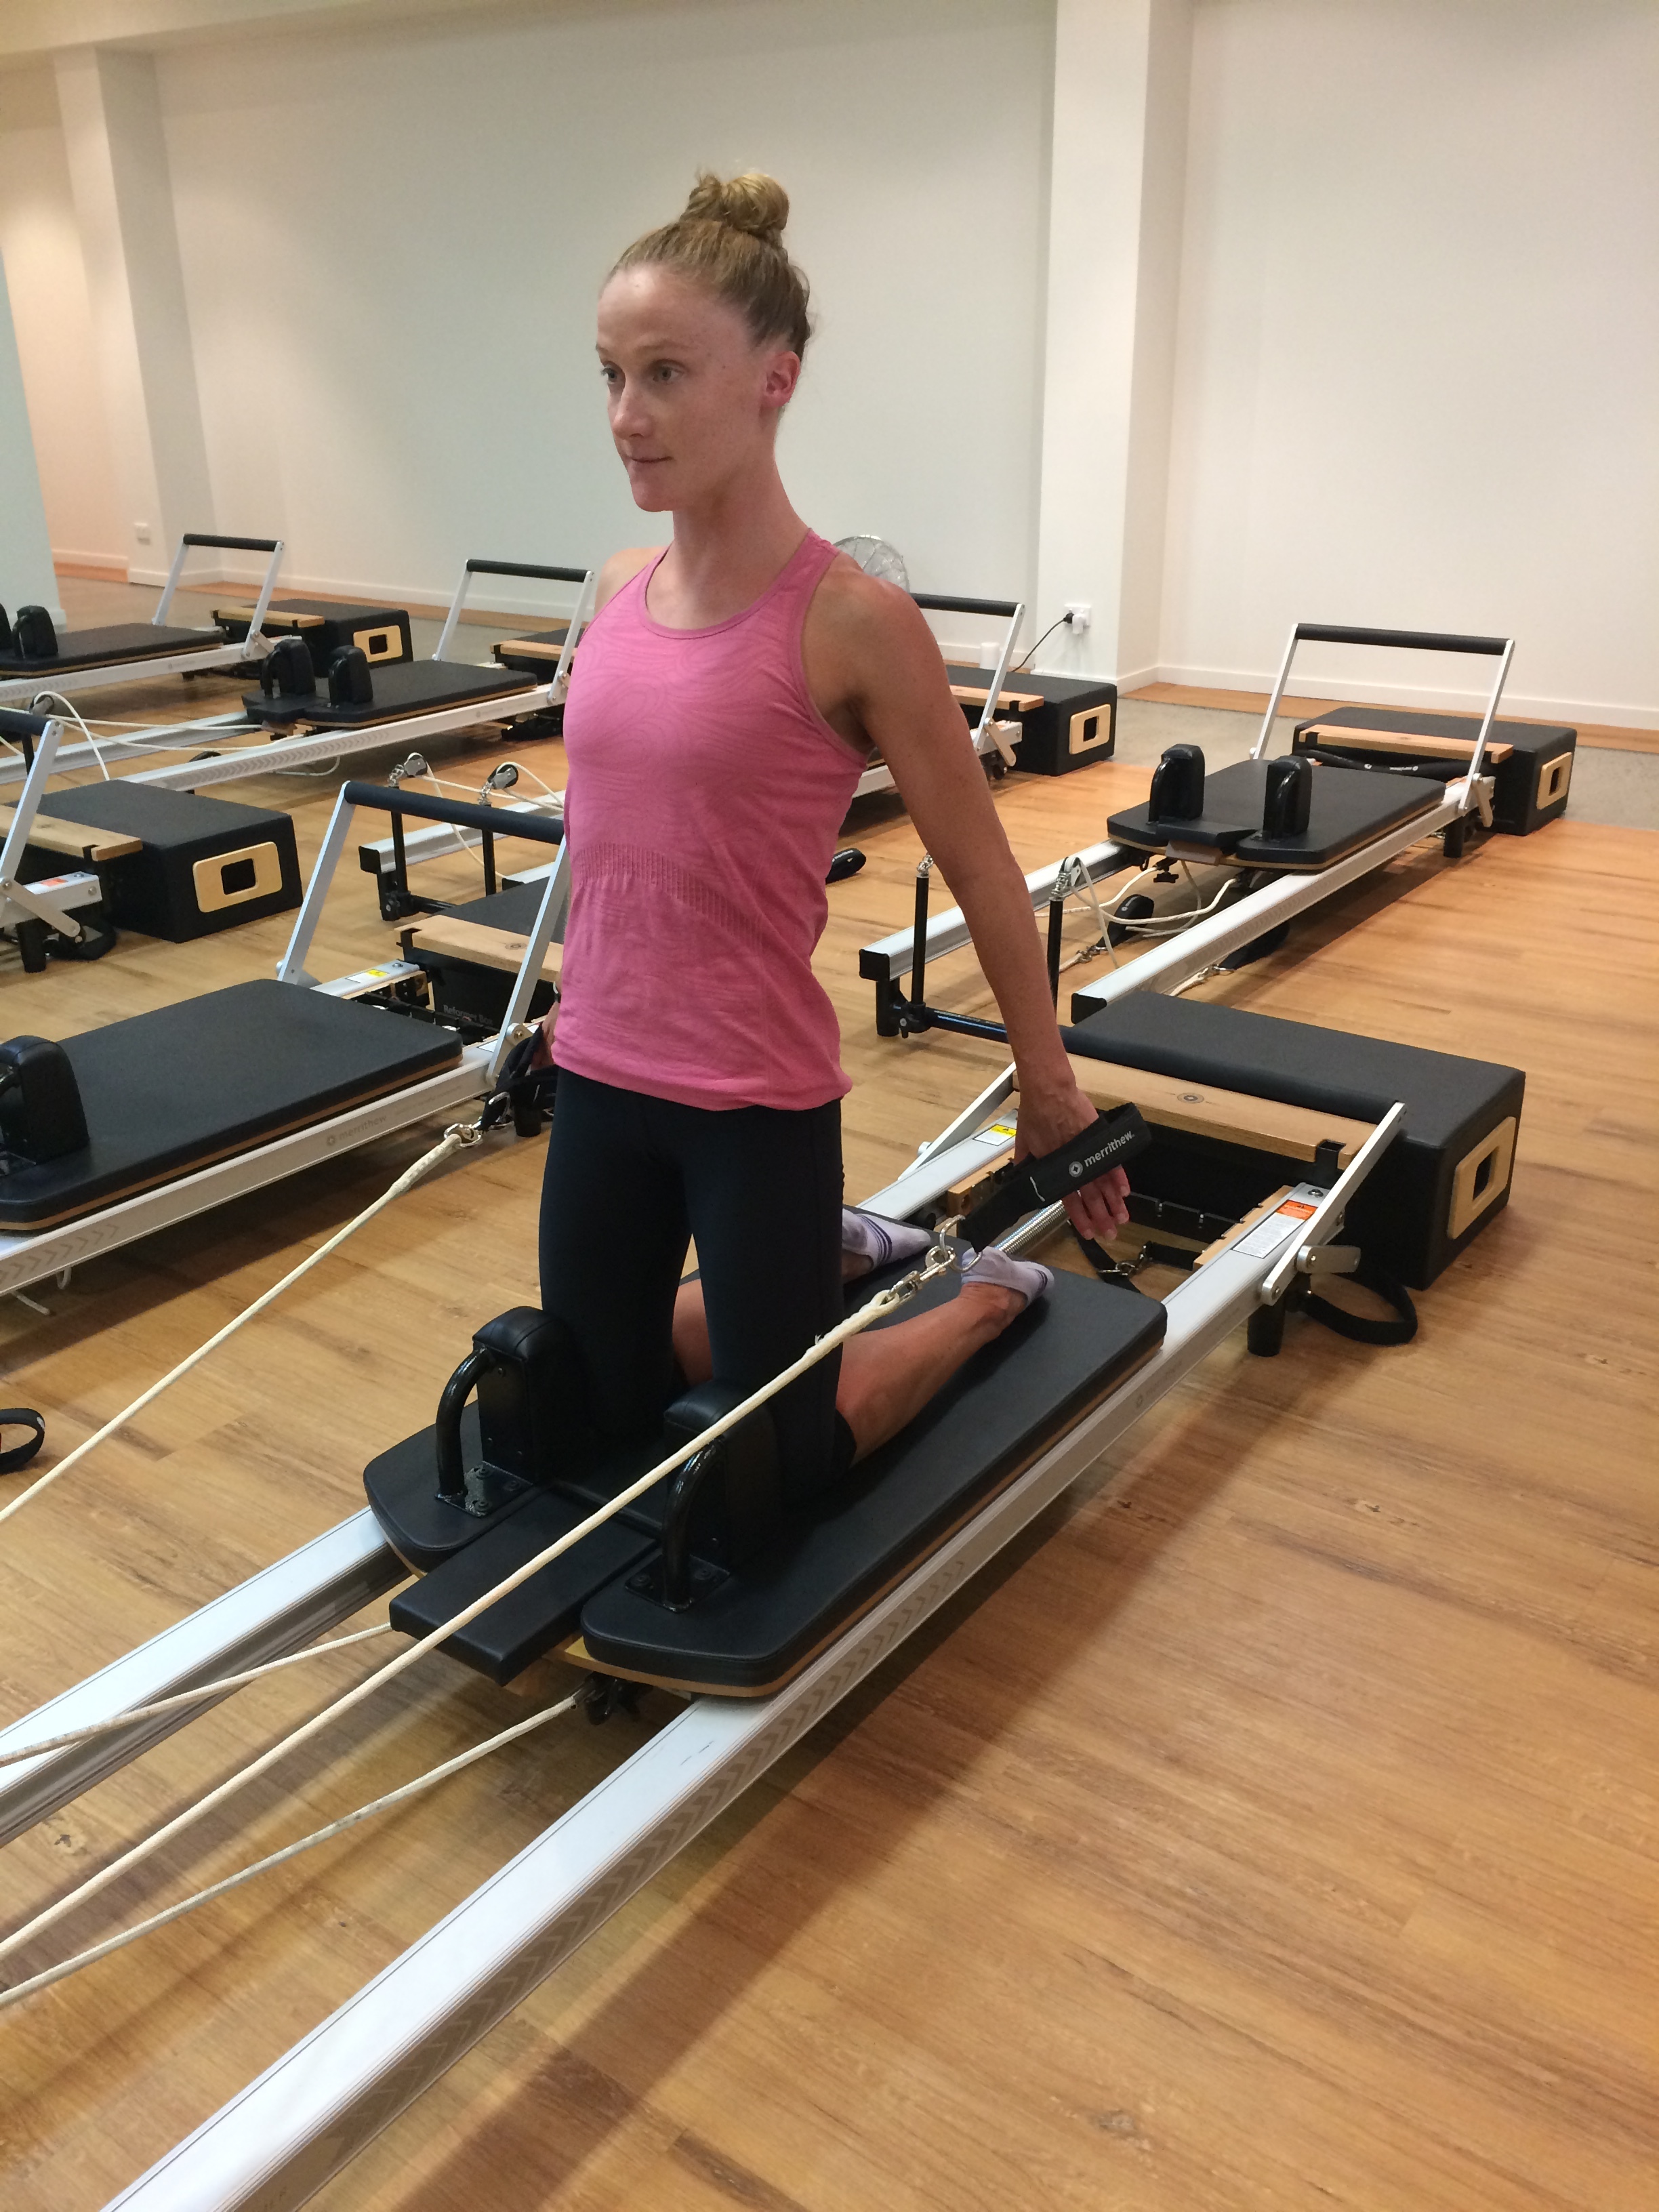 STOTT PILATES® Reformer exercises to try at home